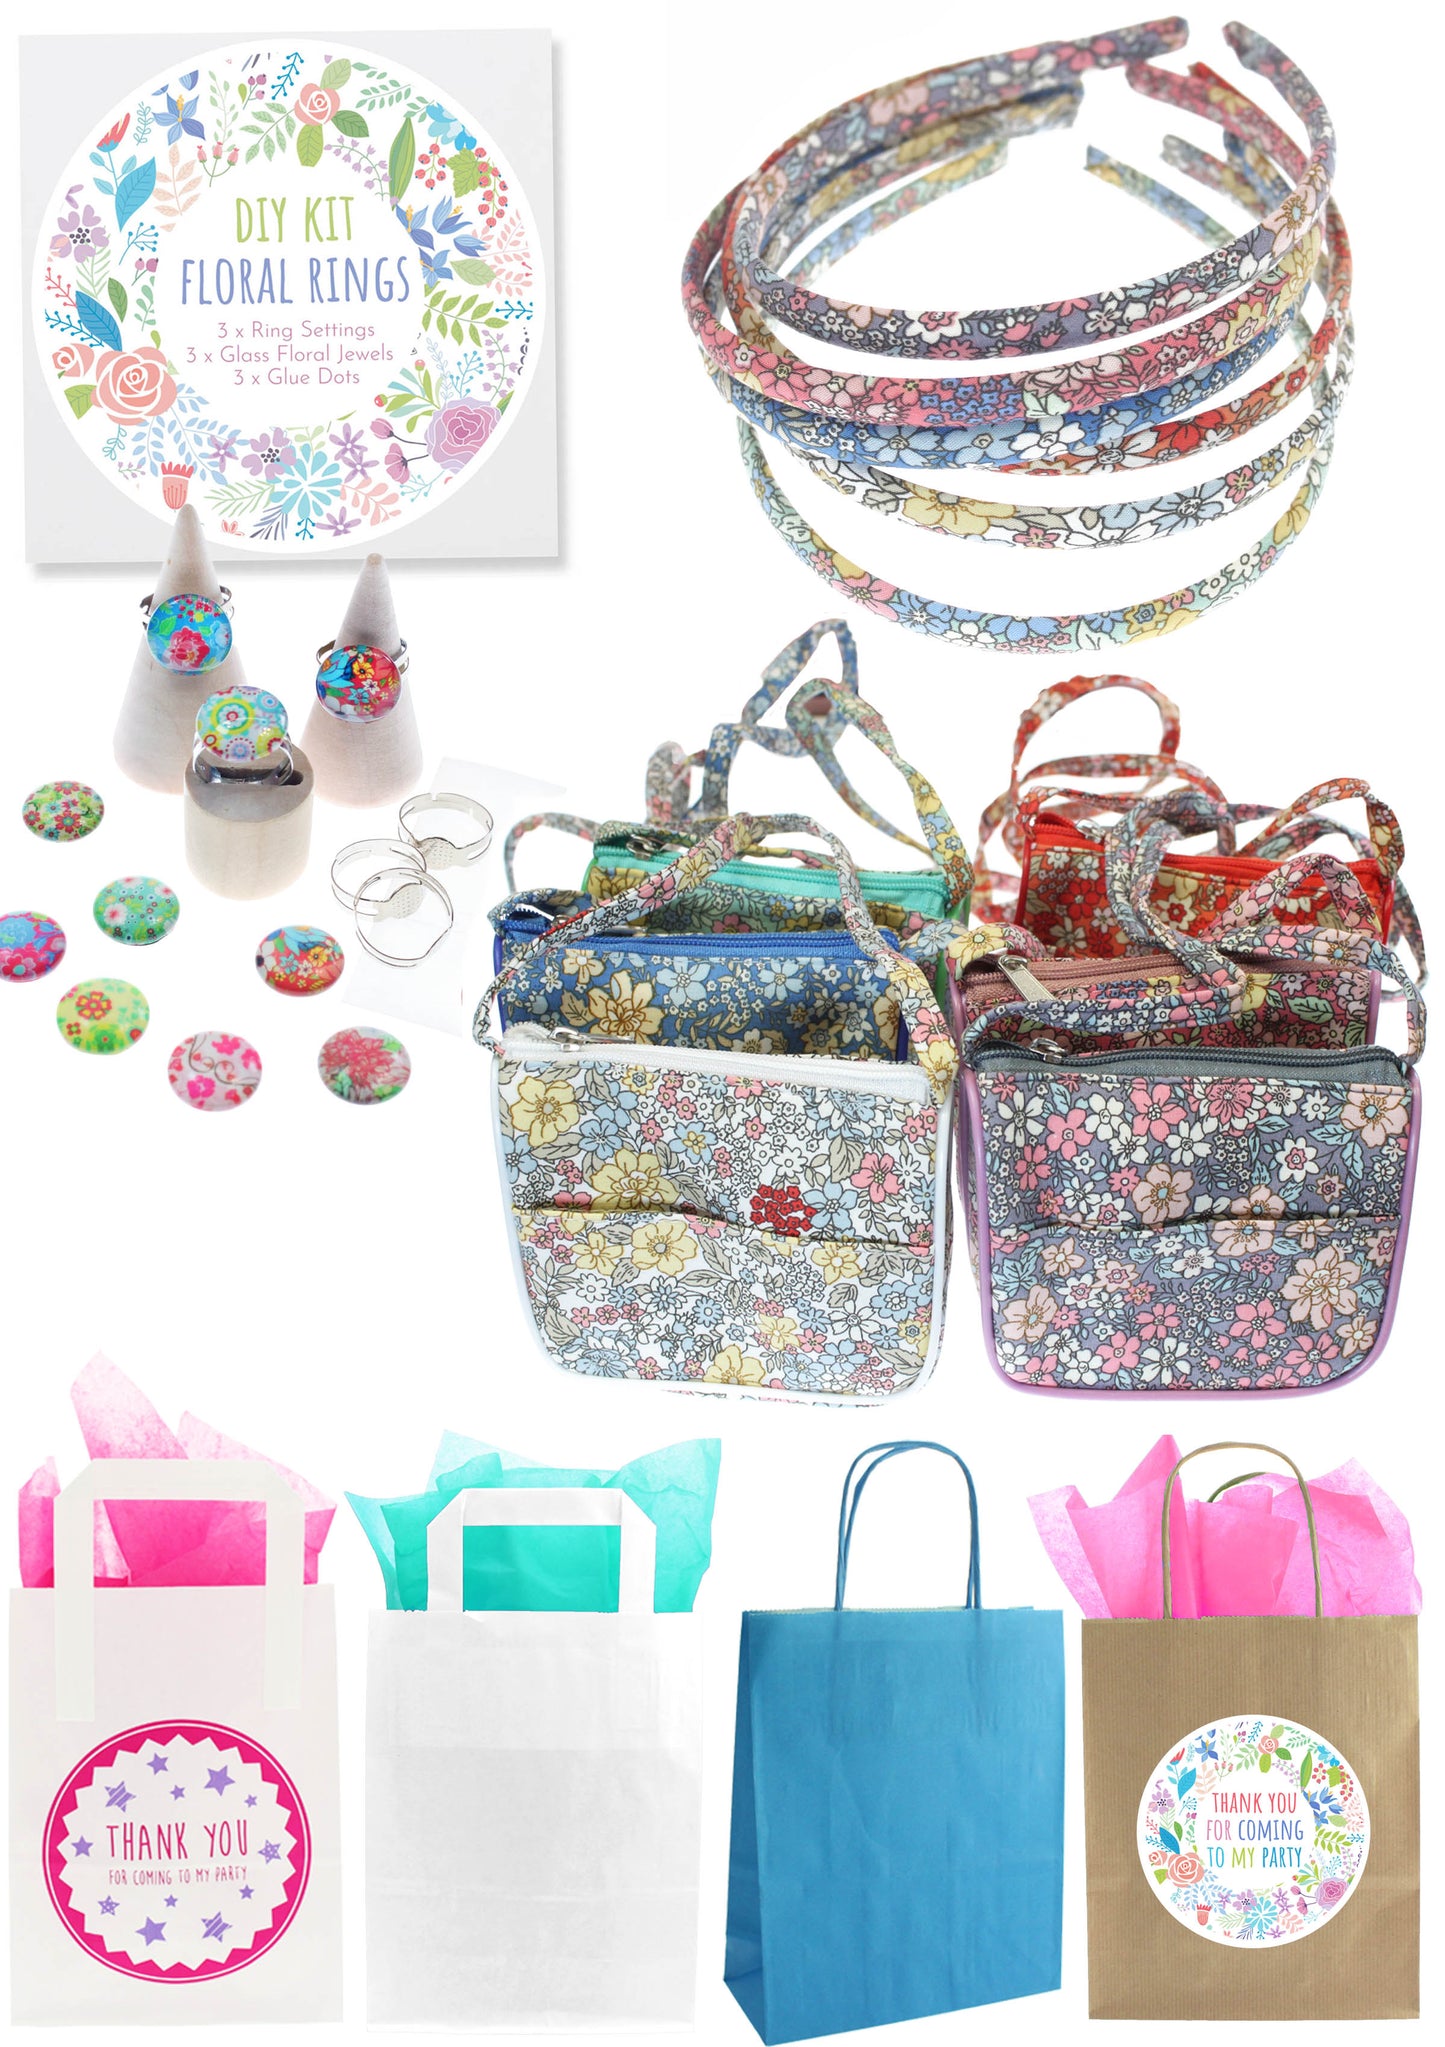 The Lily Party Bag